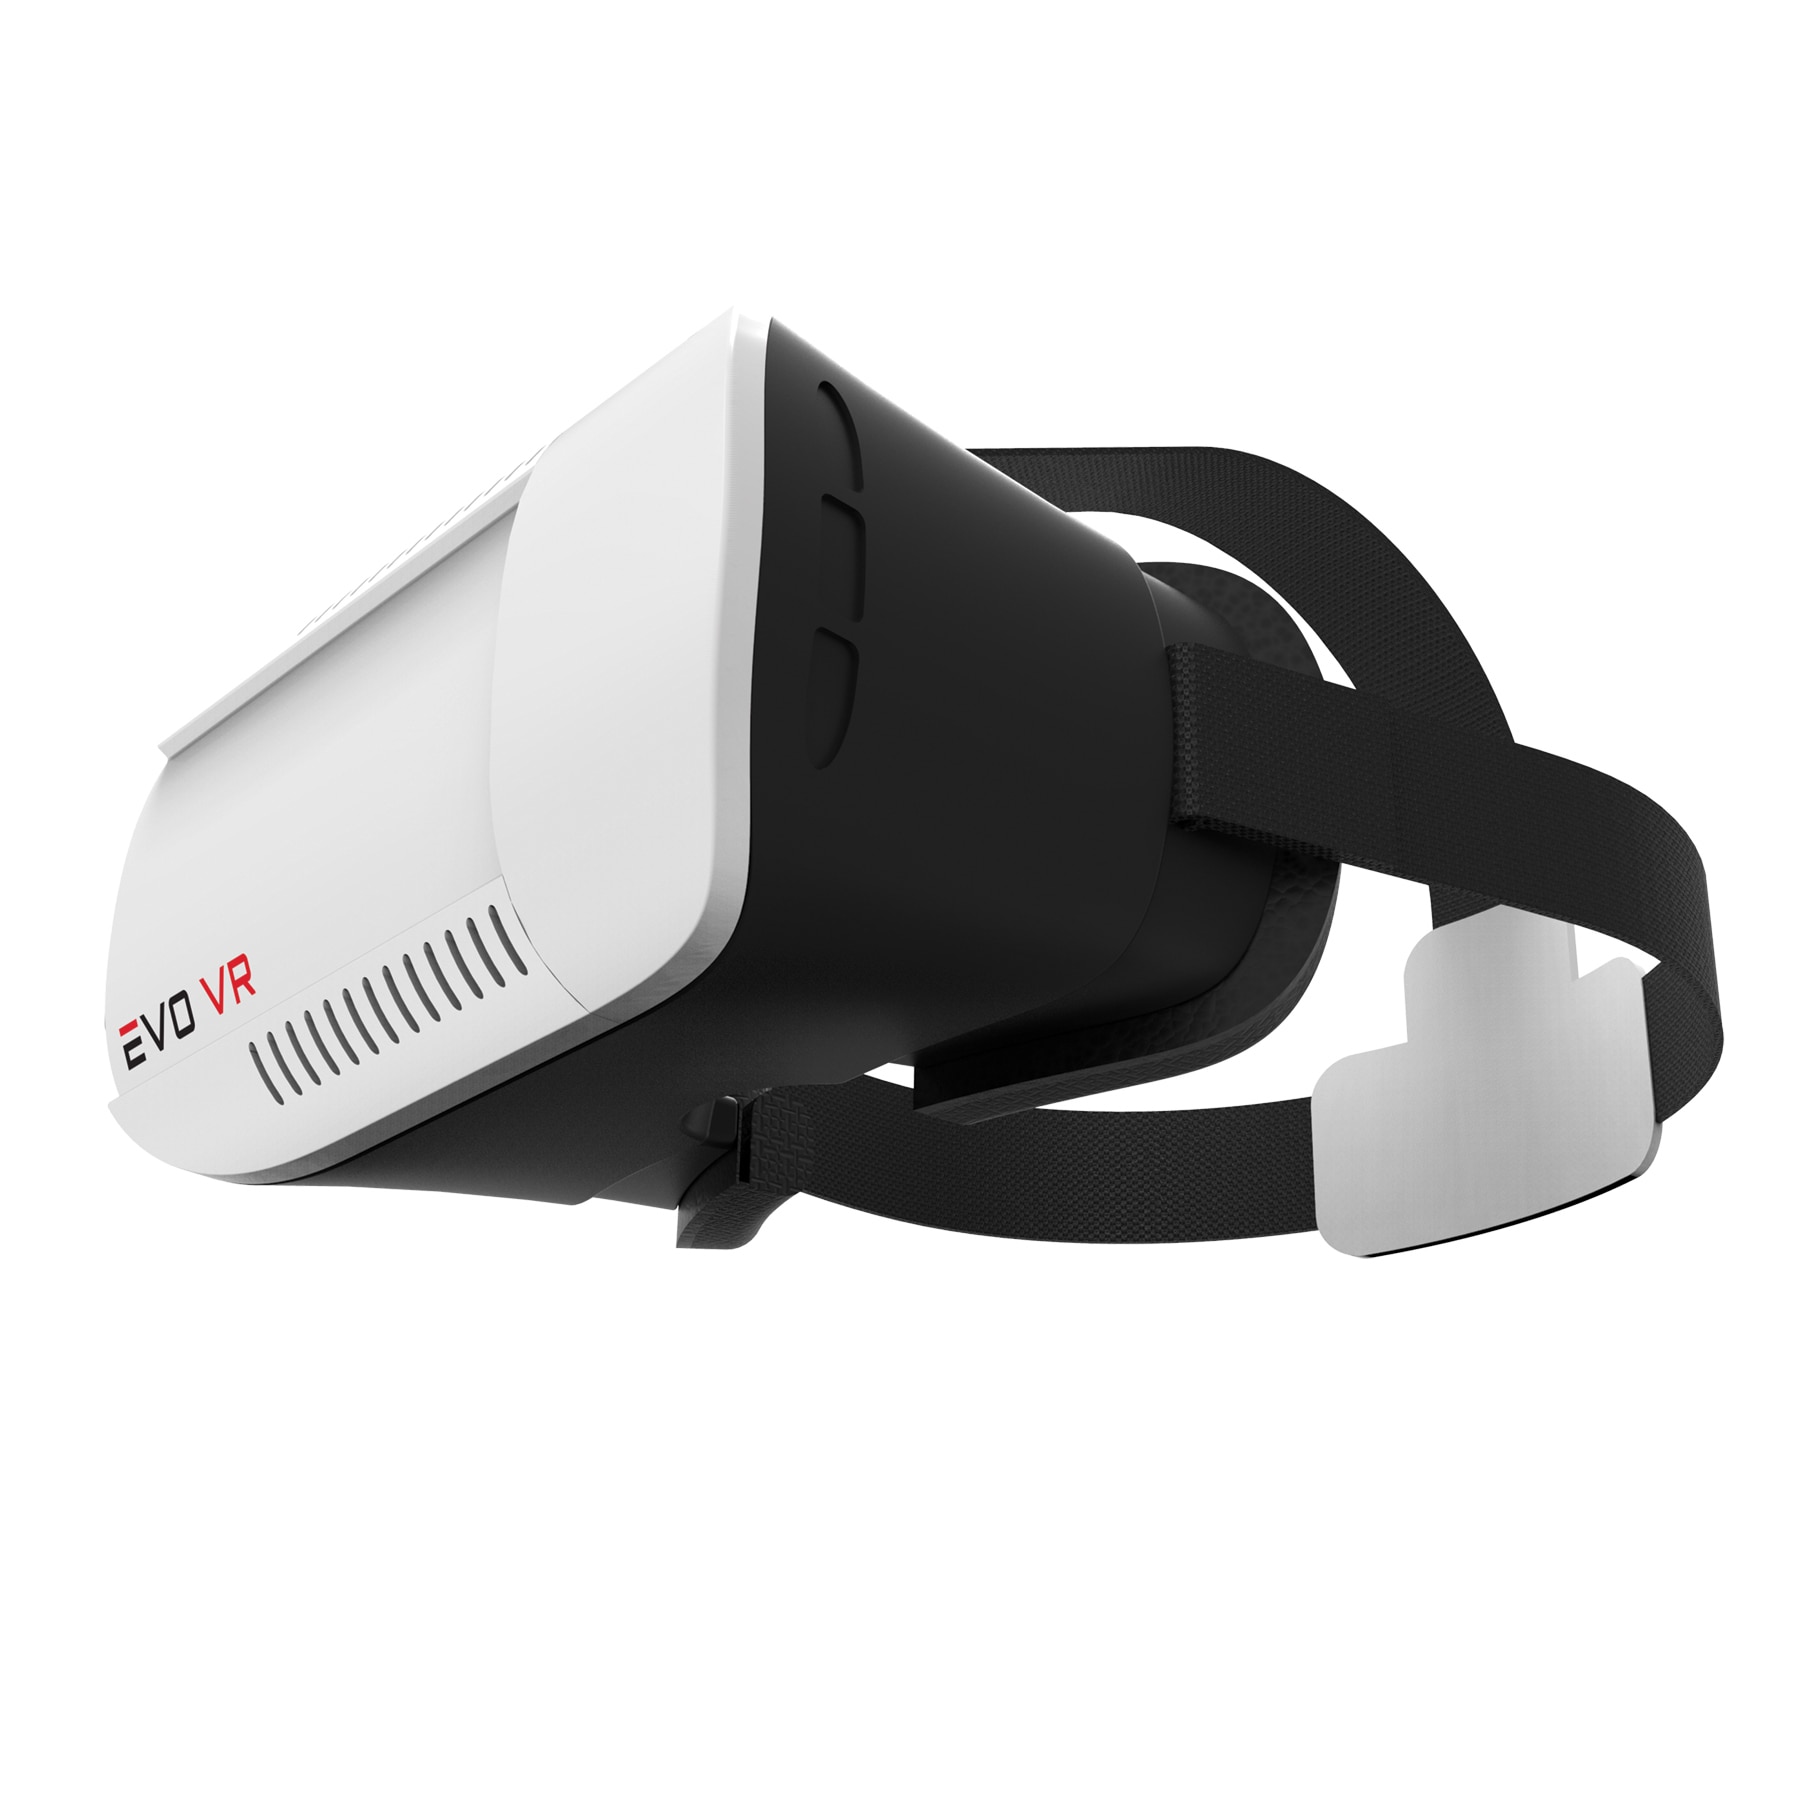 evo vr headset review